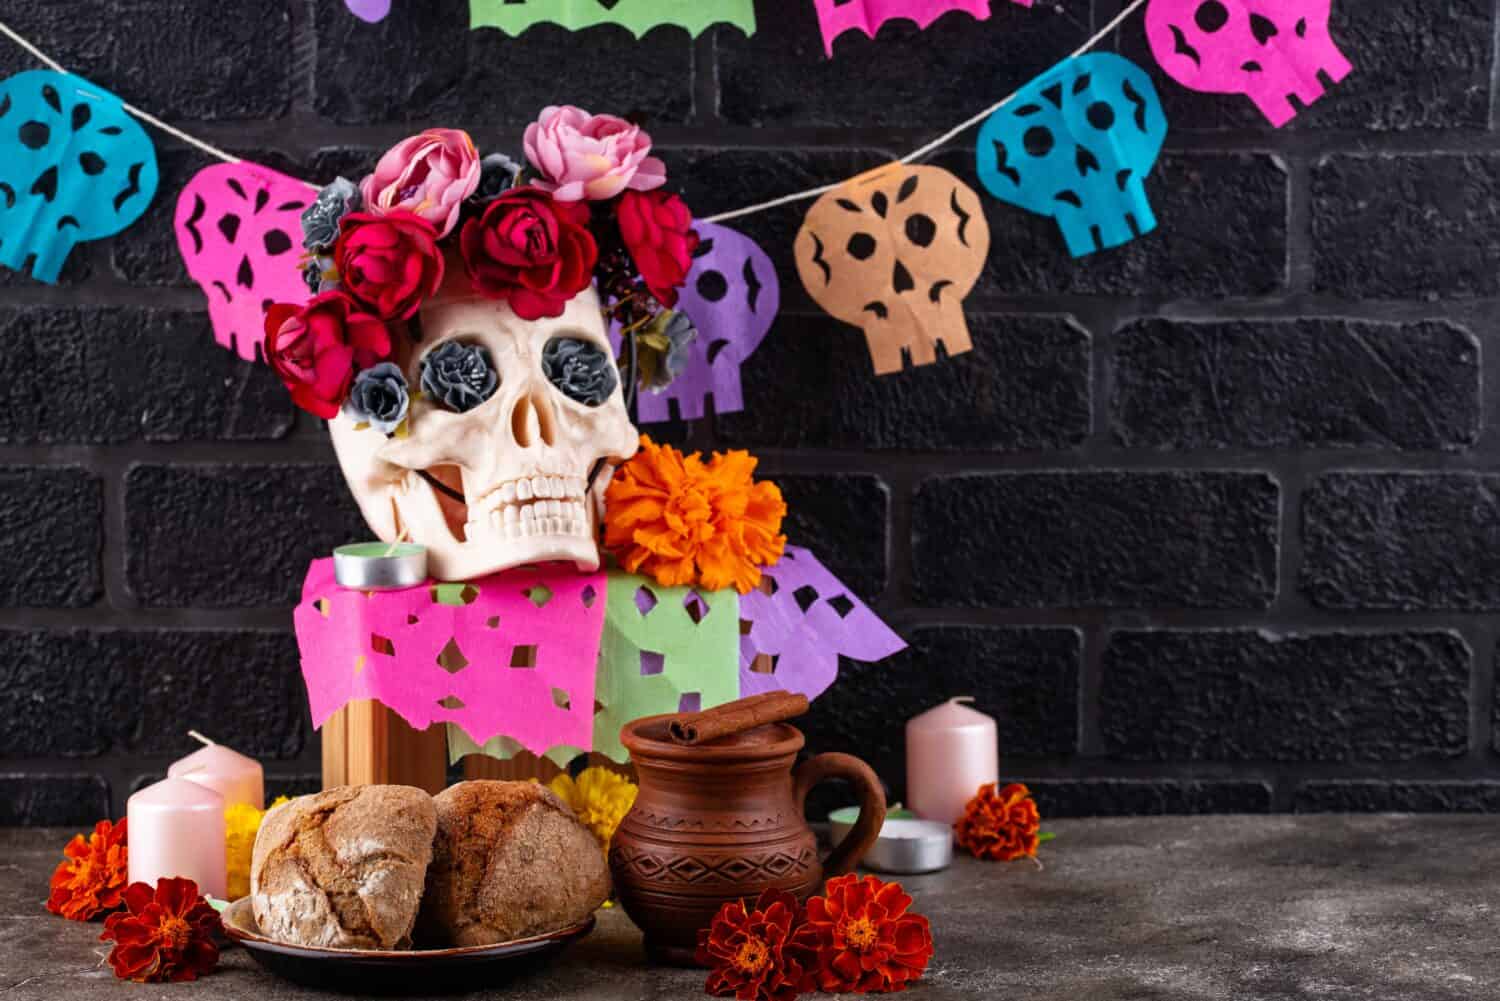 Traditional Day of the dead food for celebrating Dia De Los Muertos